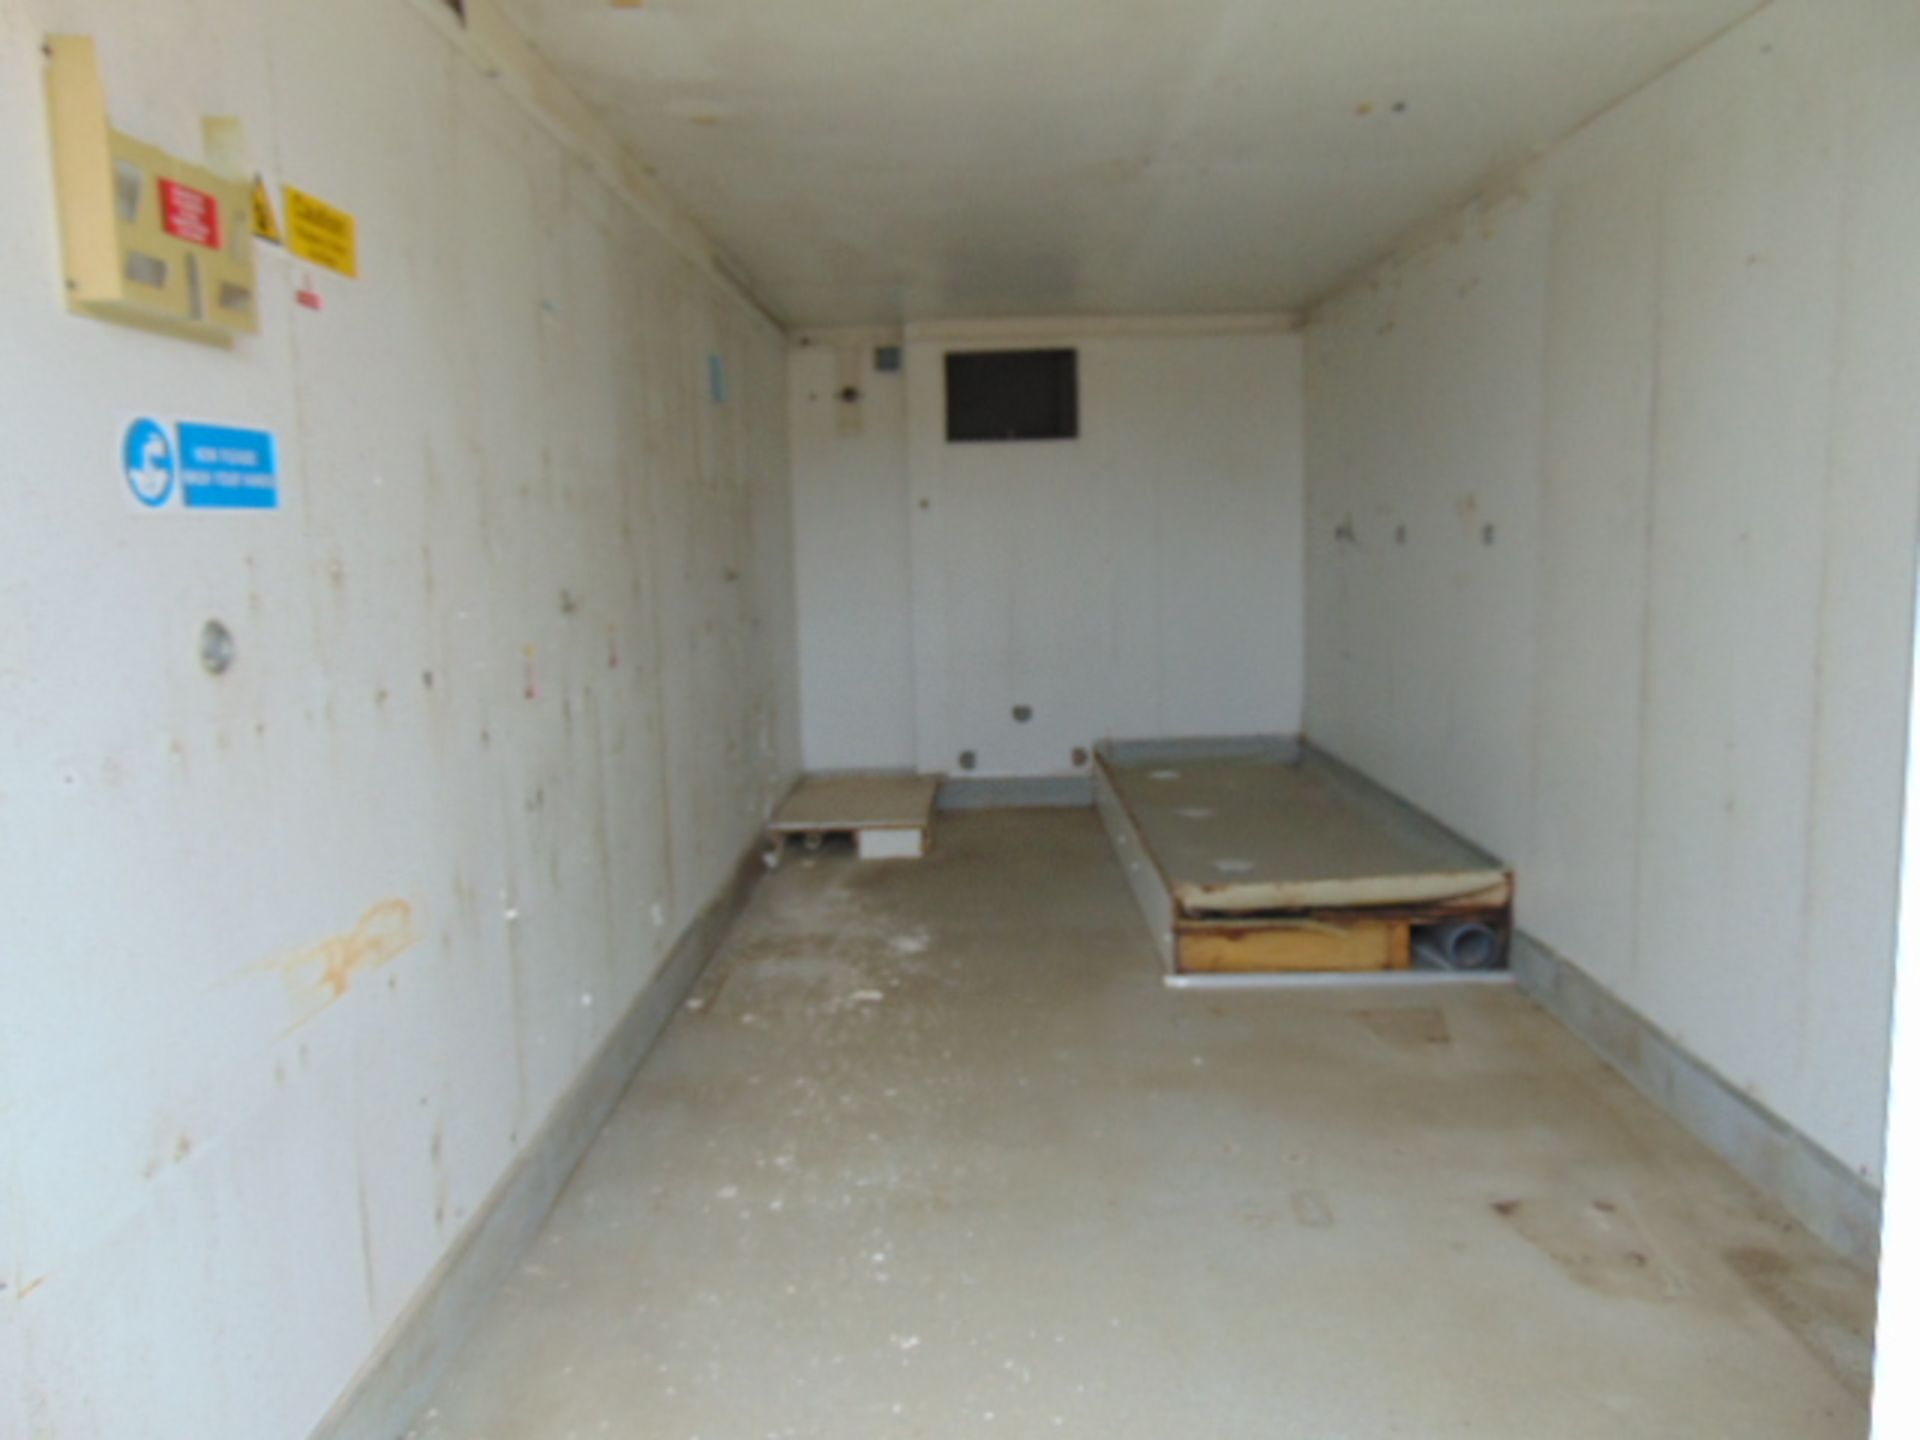 20ft Insulated ISO Container with fork handling positions, twist lock castings etc - Image 12 of 15